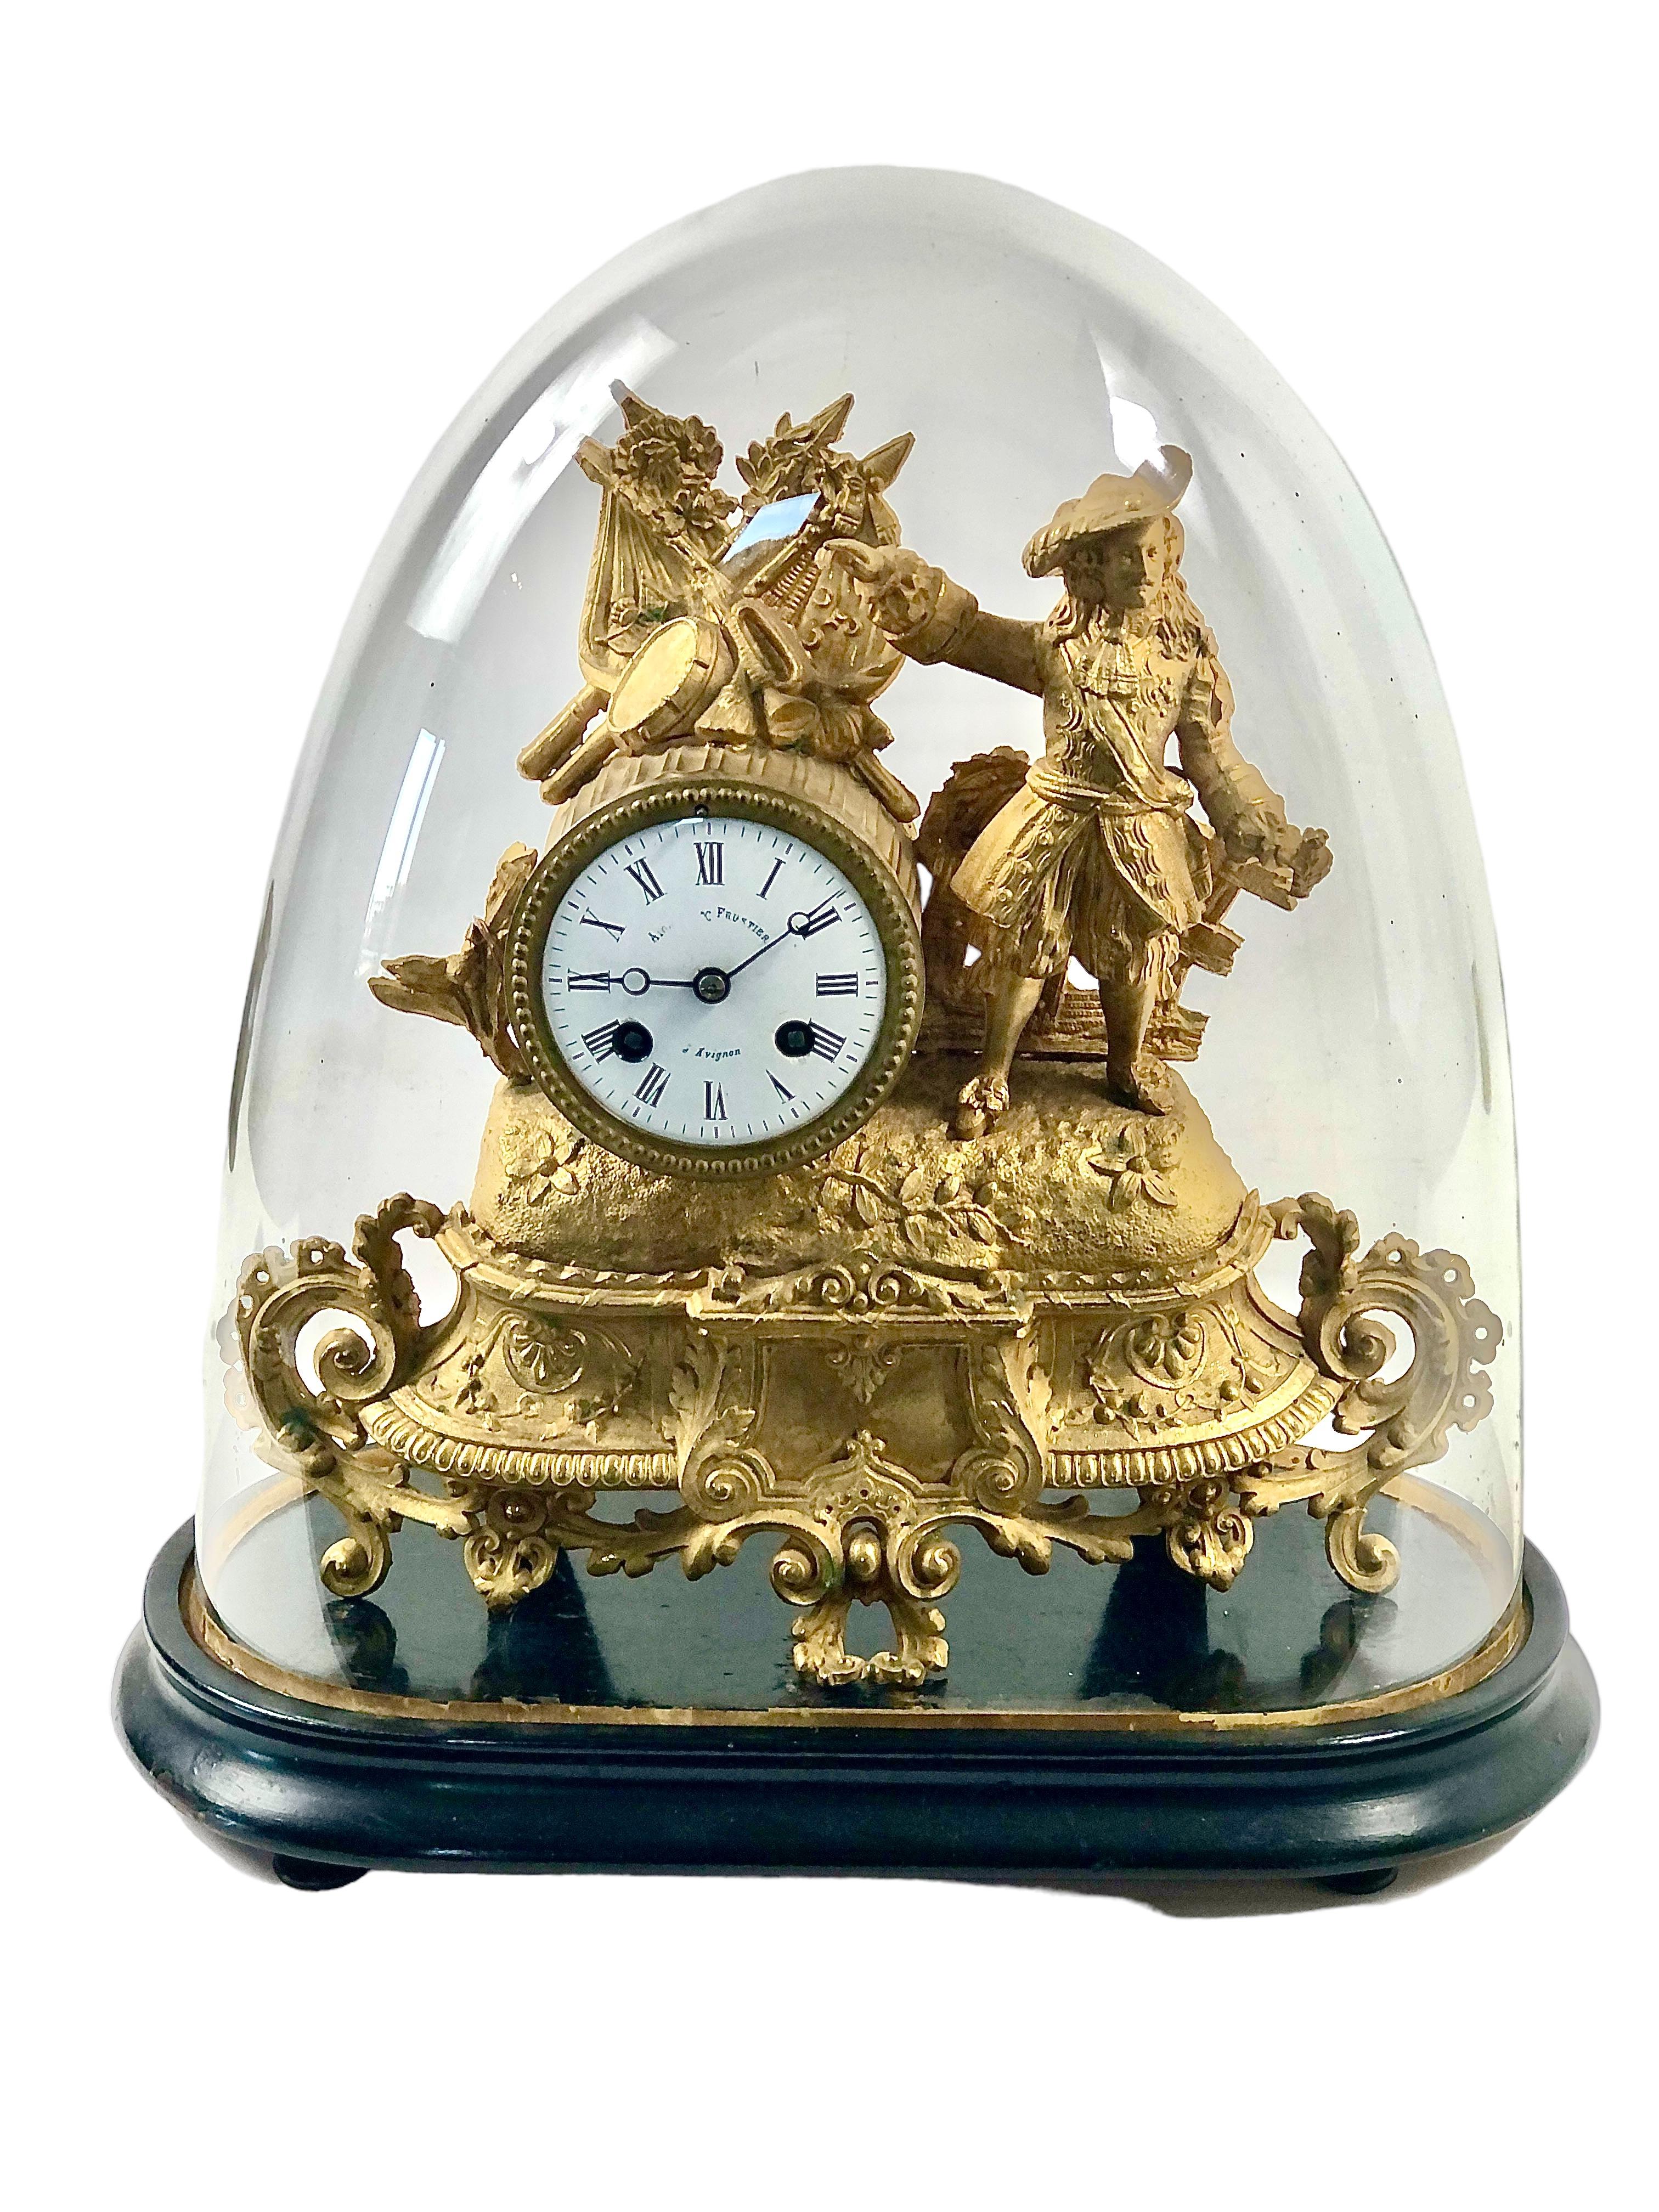 19th century French Gilt Mantel Clock under Glass Dome 1